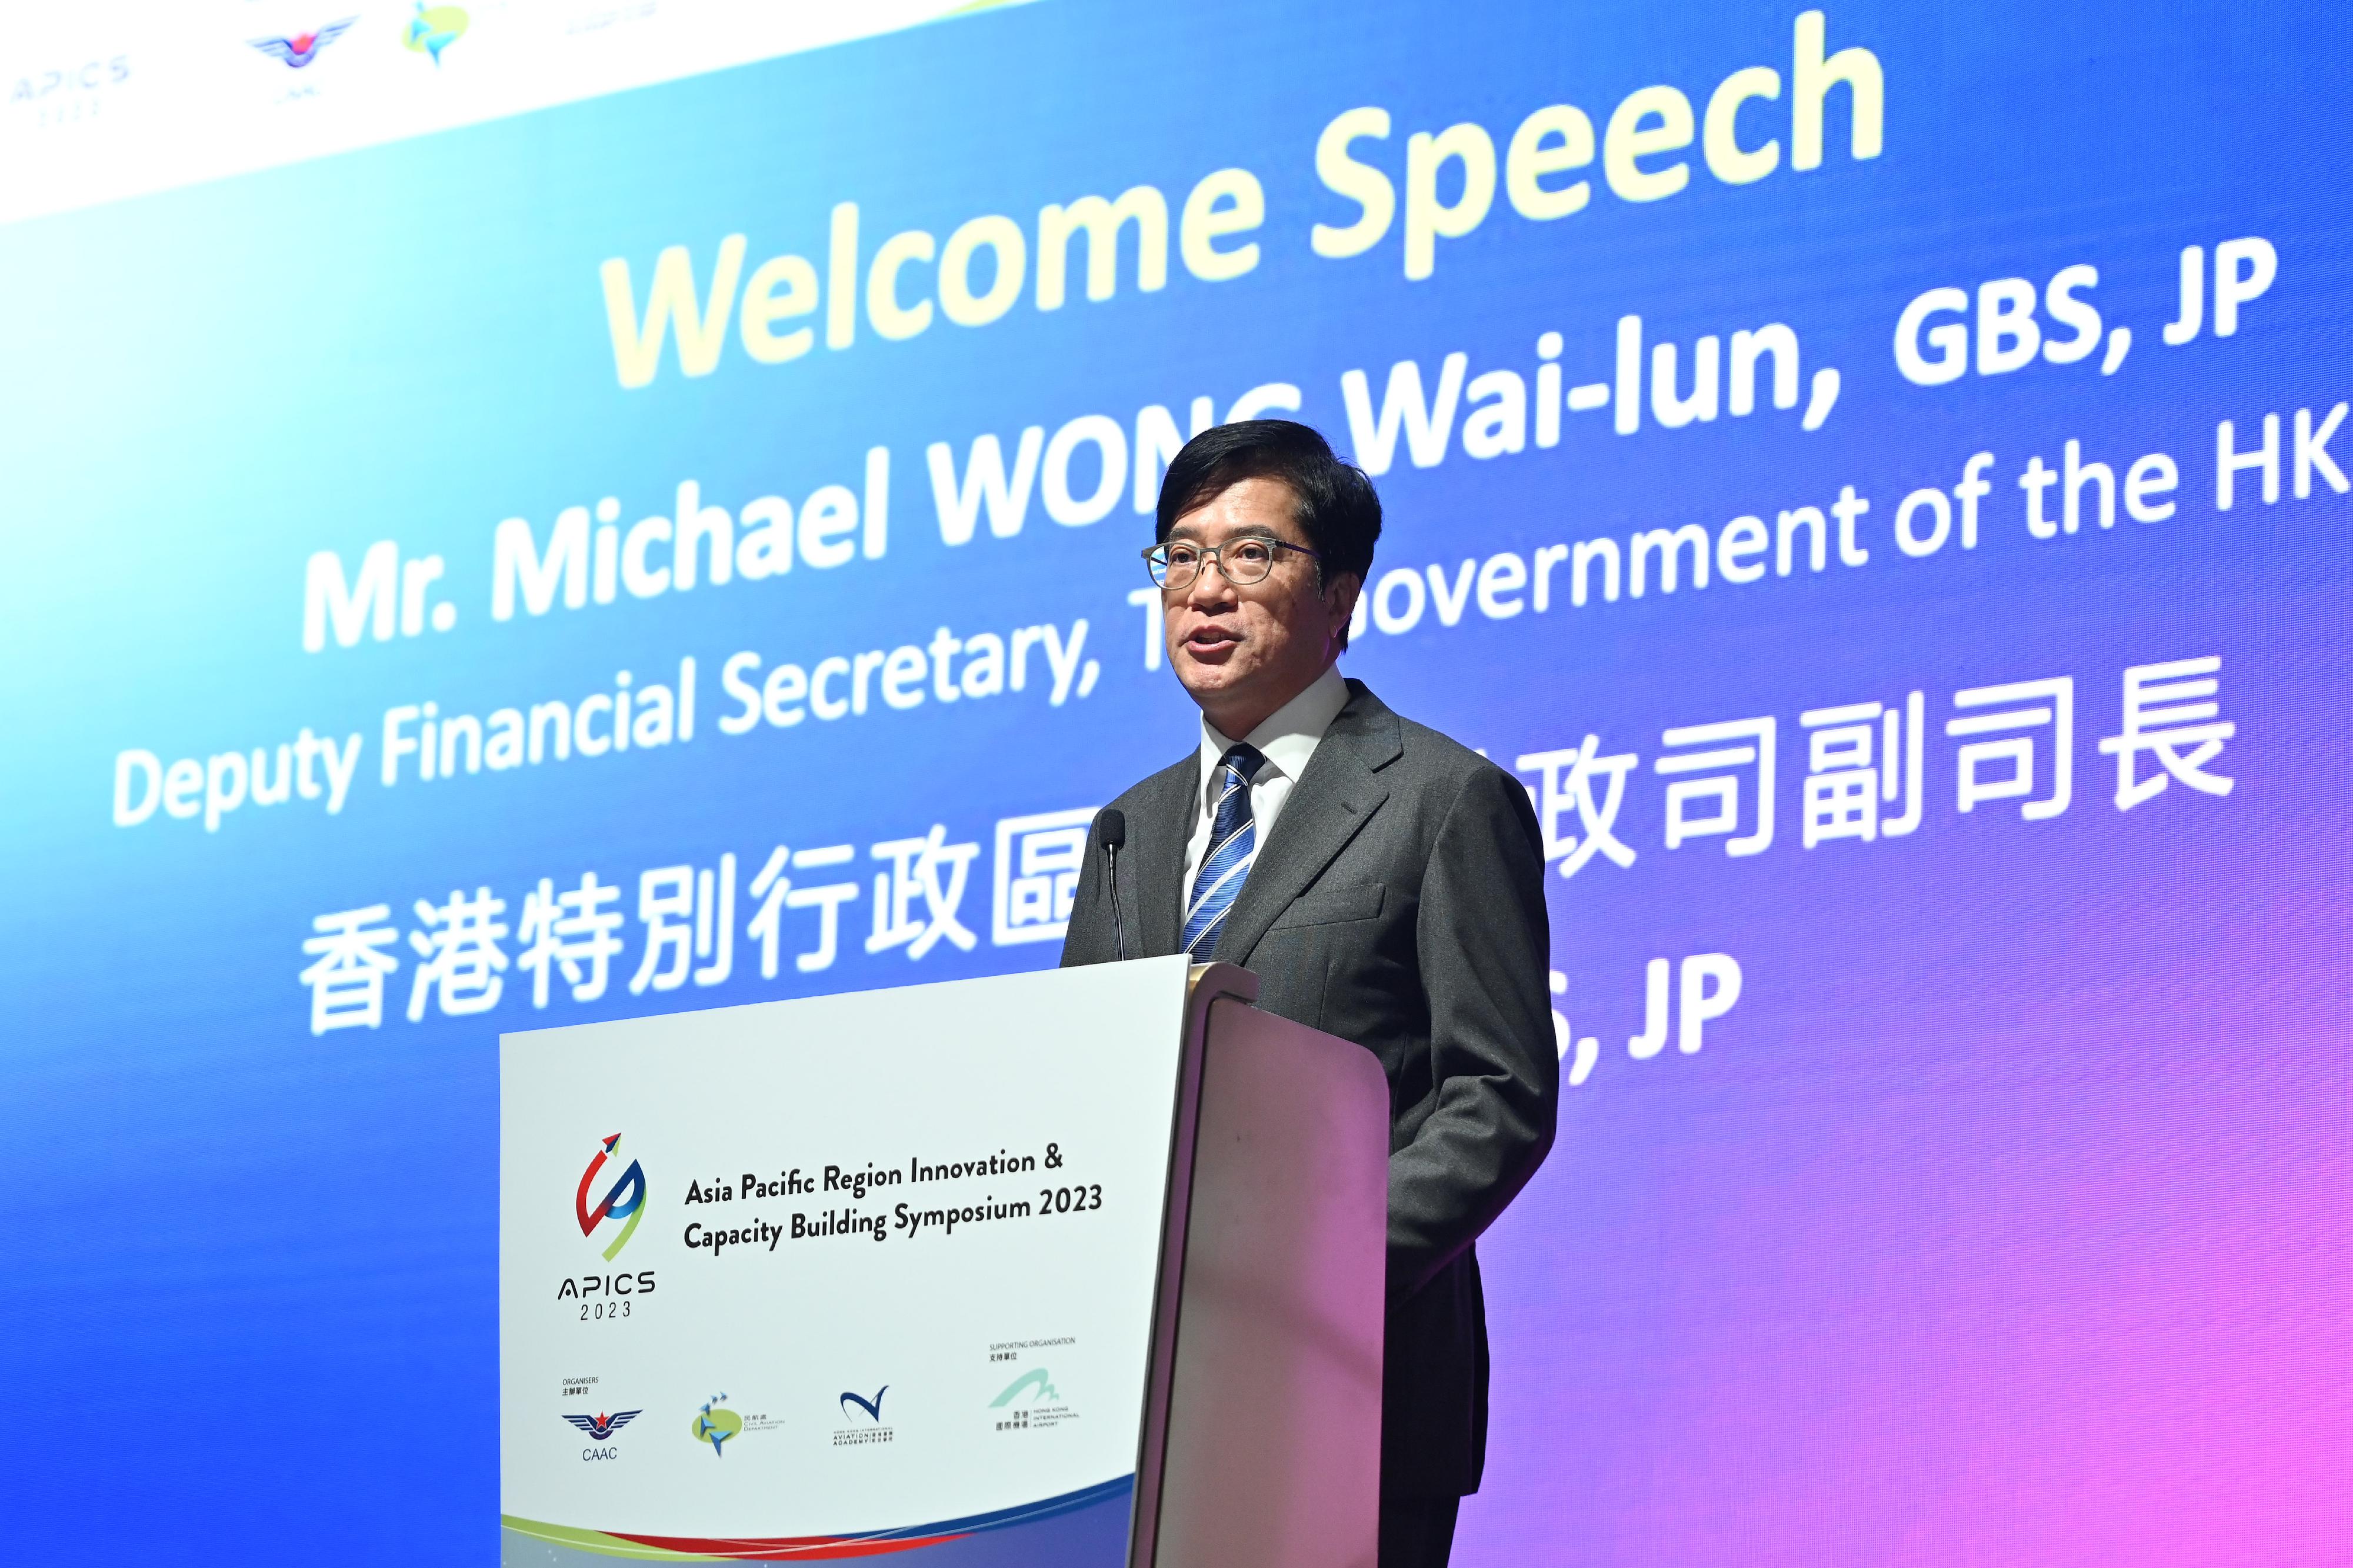 The Asia Pacific Region Innovation & Capacity Building Symposium 2023 (APICS 2023) commenced today (December 14). Photo shows the Deputy Financial Secretary, Mr Michael Wong, delivering opening remarks at the APICS 2023 opening ceremony.